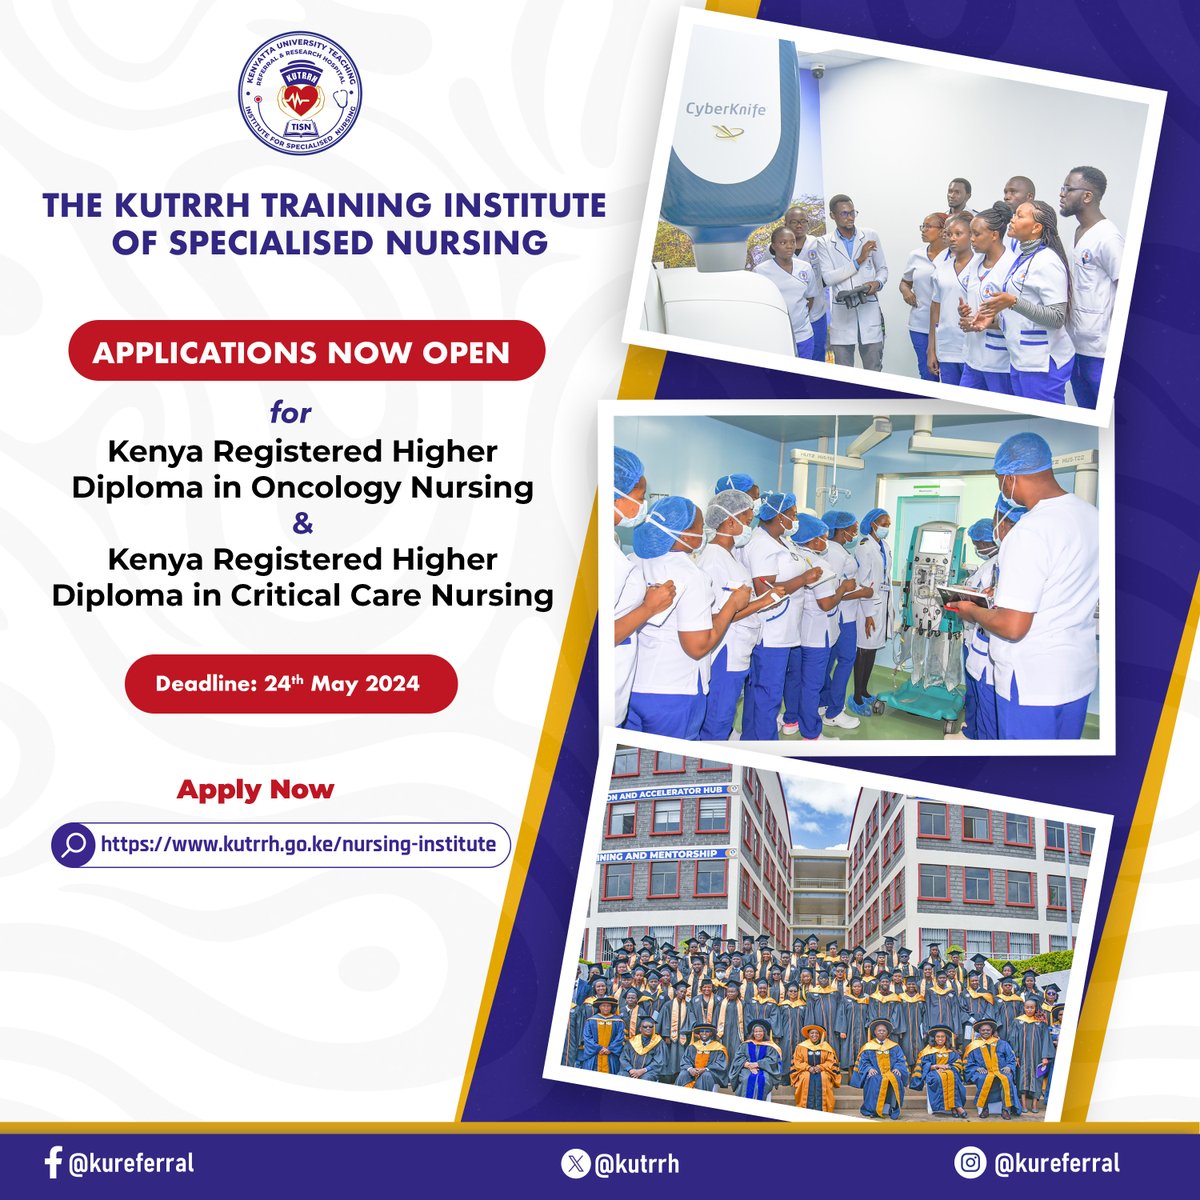 The KUTRRH Training Institute for Specialized Nursing (TISN) is happy to announce that applications are NOW OPEN for higher diploma courses in: 1. Kenya Registered Higher Diploma in Oncology Nursing 2. Kenya Registered Higher Diploma in Critical Care Nursing For July 2024